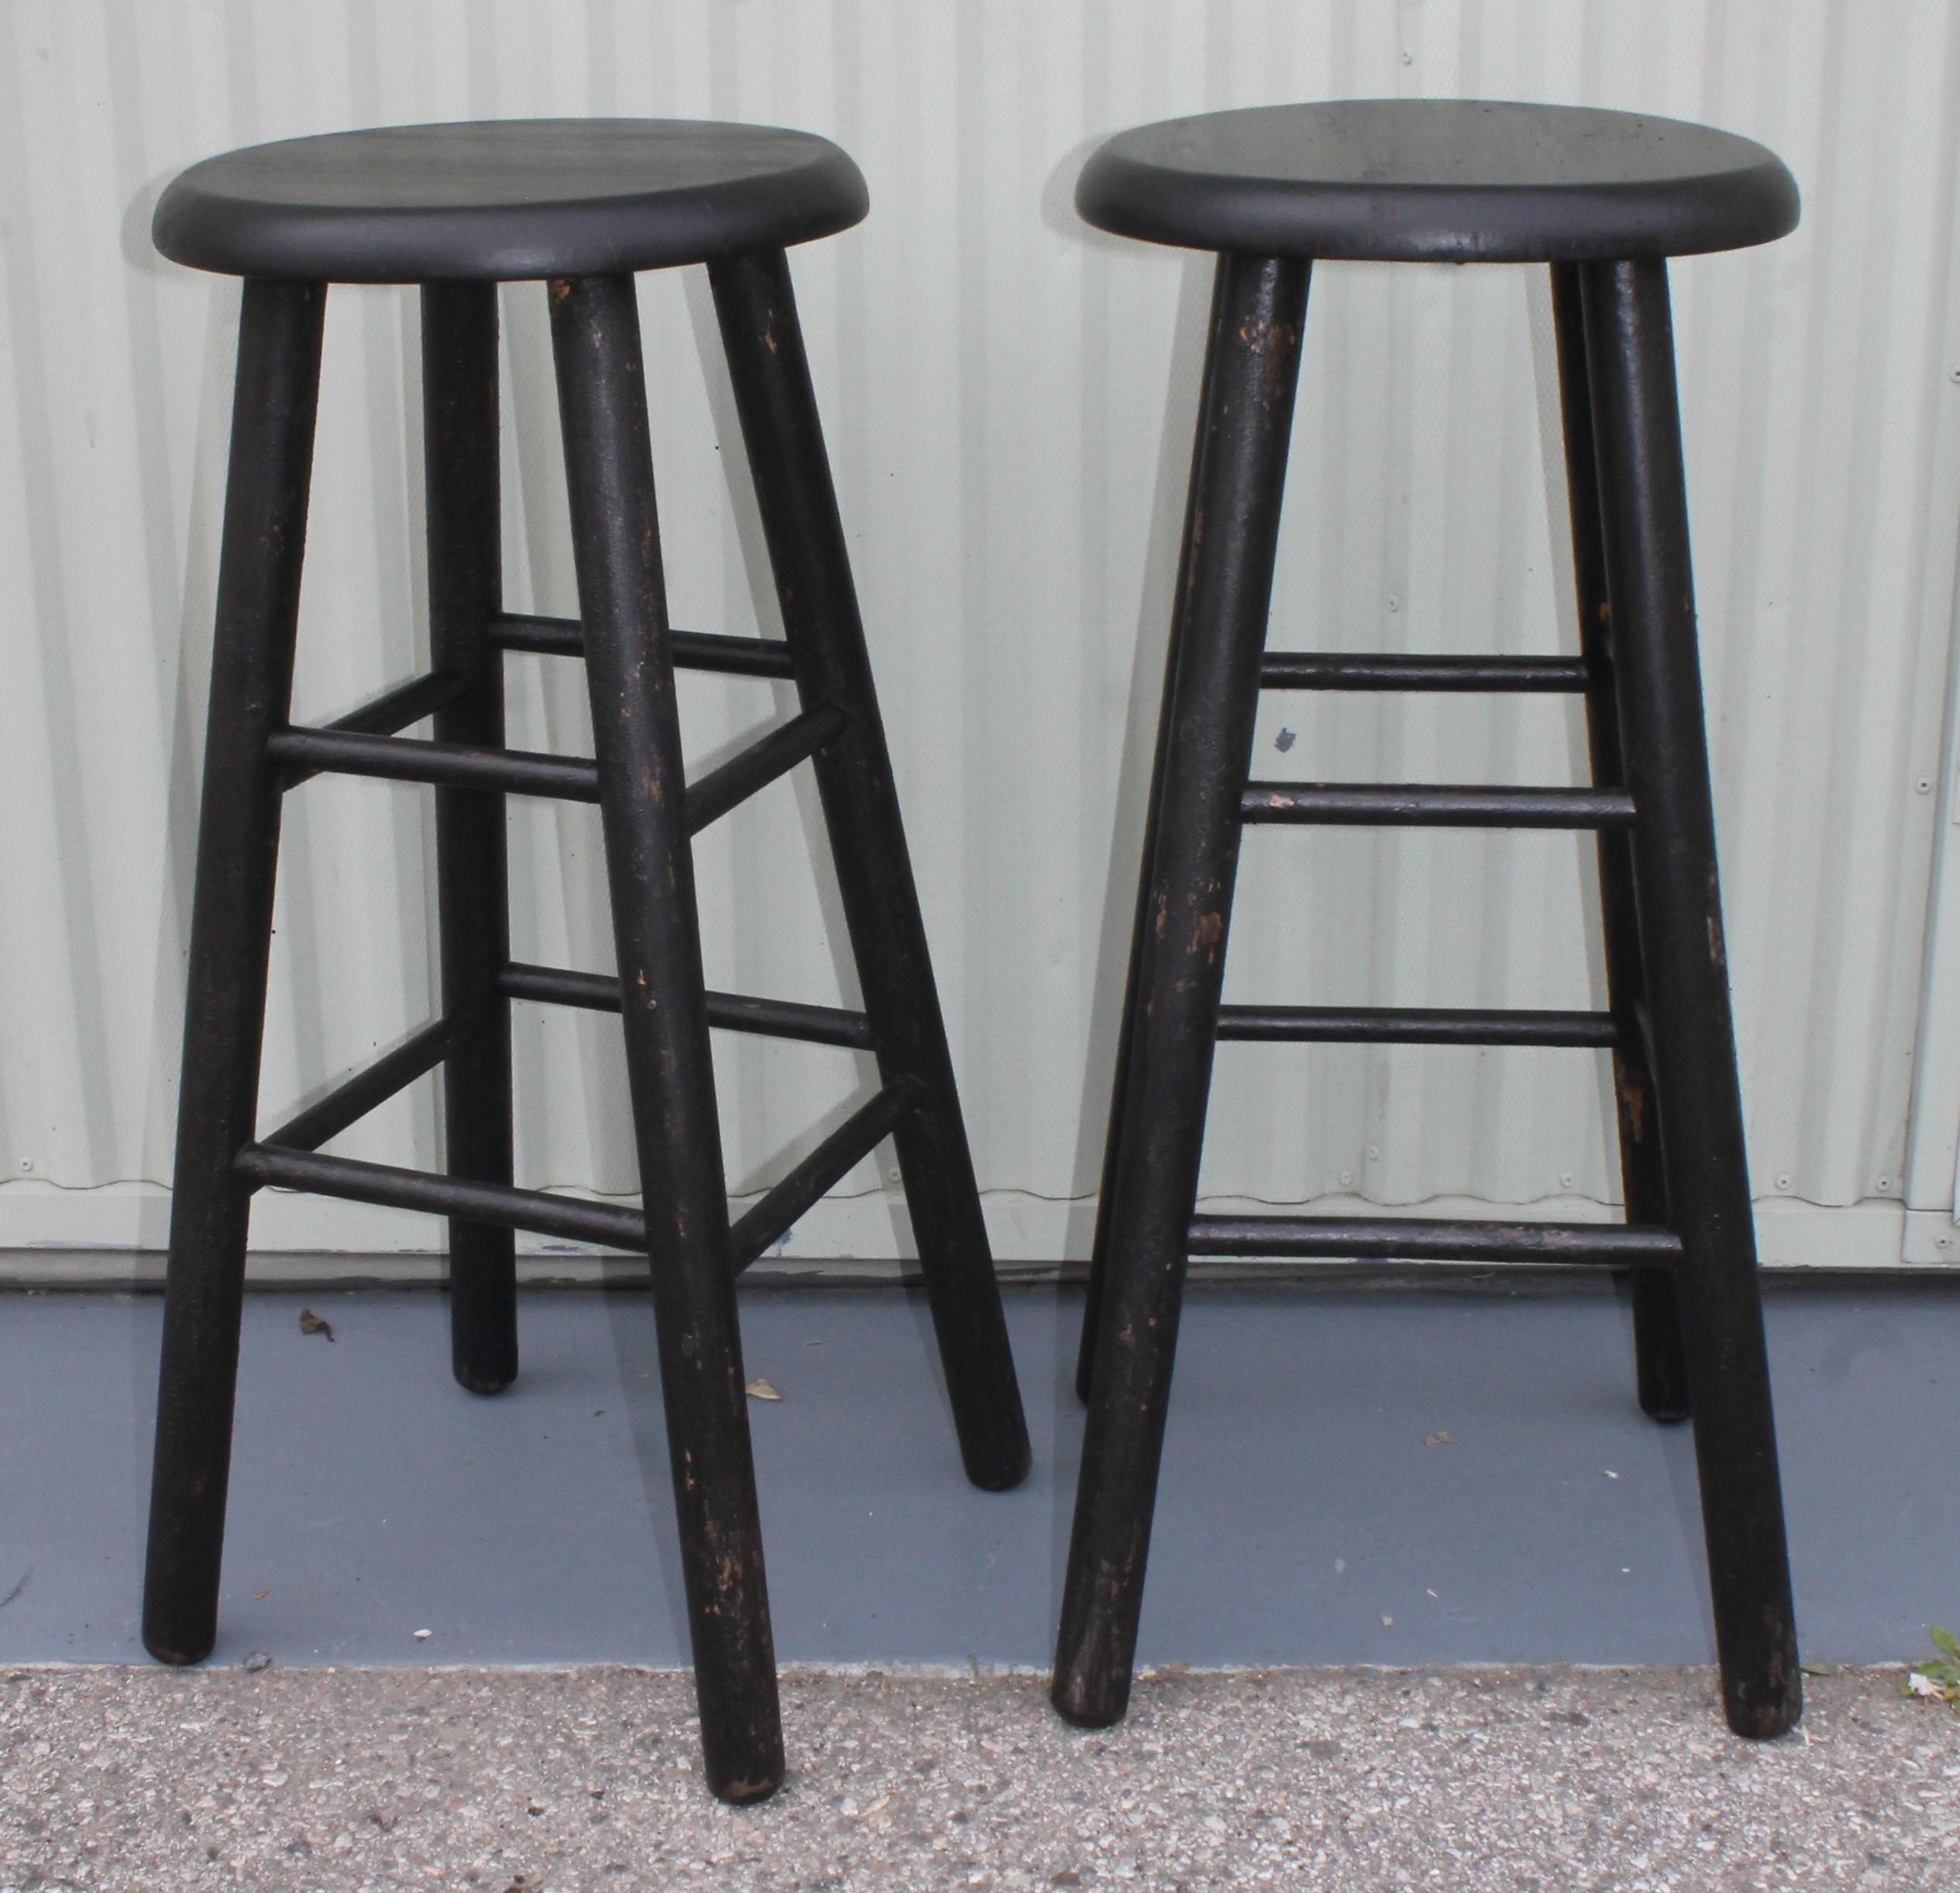 Pair of midcentury plank seat bar stools. Beautiful black painted surface. In great and sturdy condition.